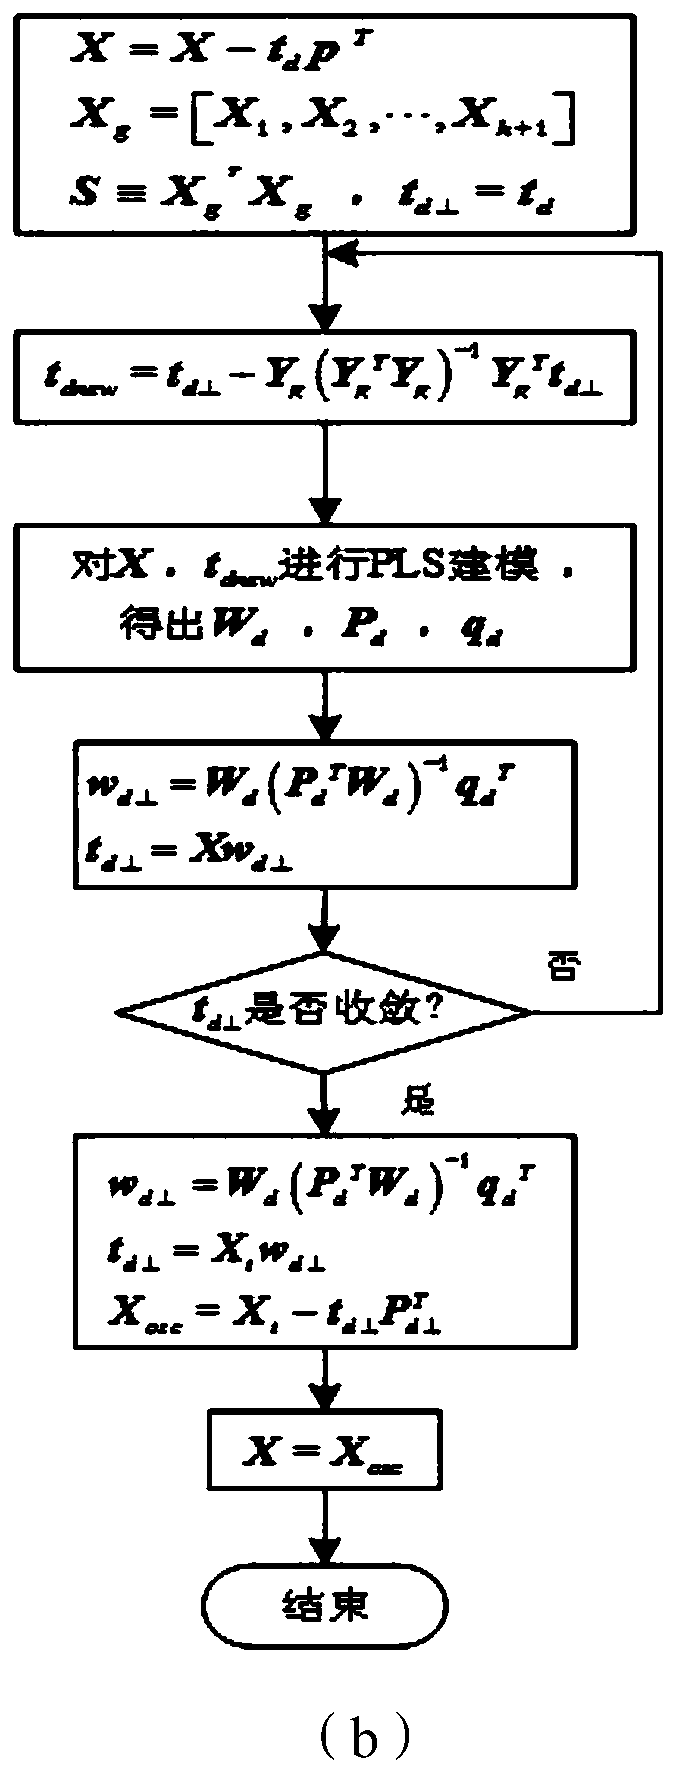 Fault detection method and system for complex process considering dynamic relationship in advance